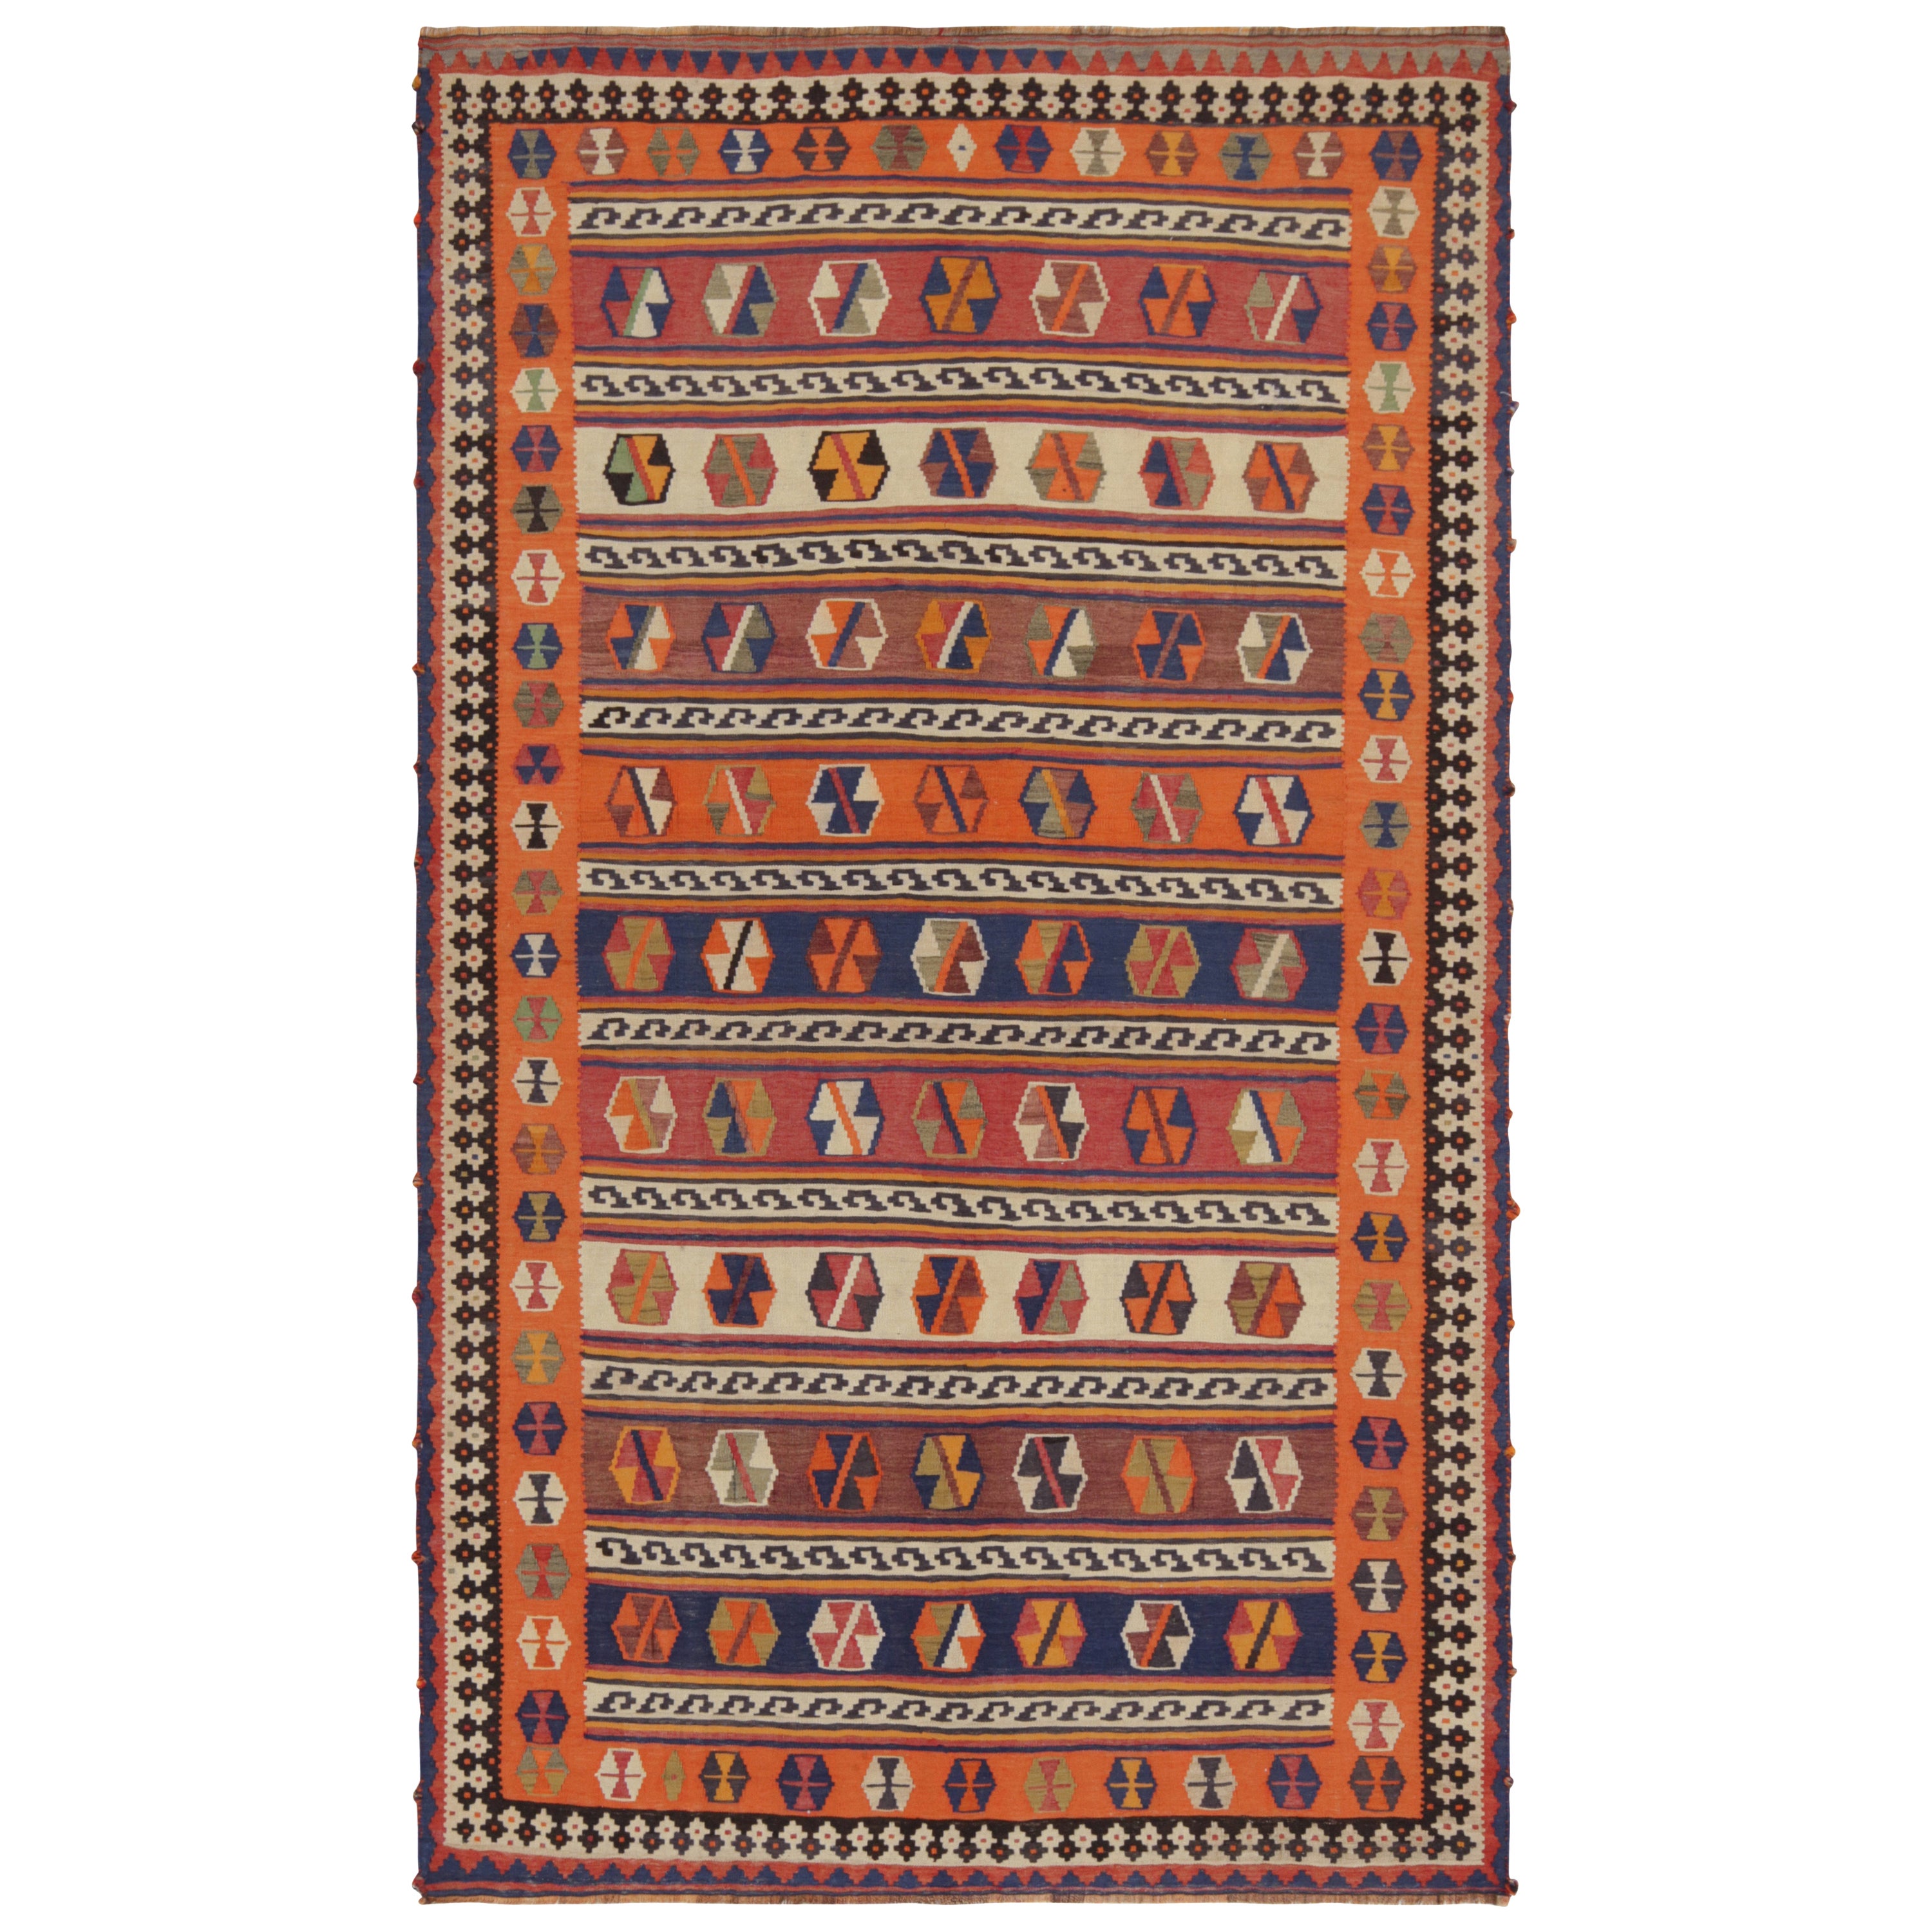 Vintage Qashqai Persian Kilim in Orange with Geometric Patterns For Sale